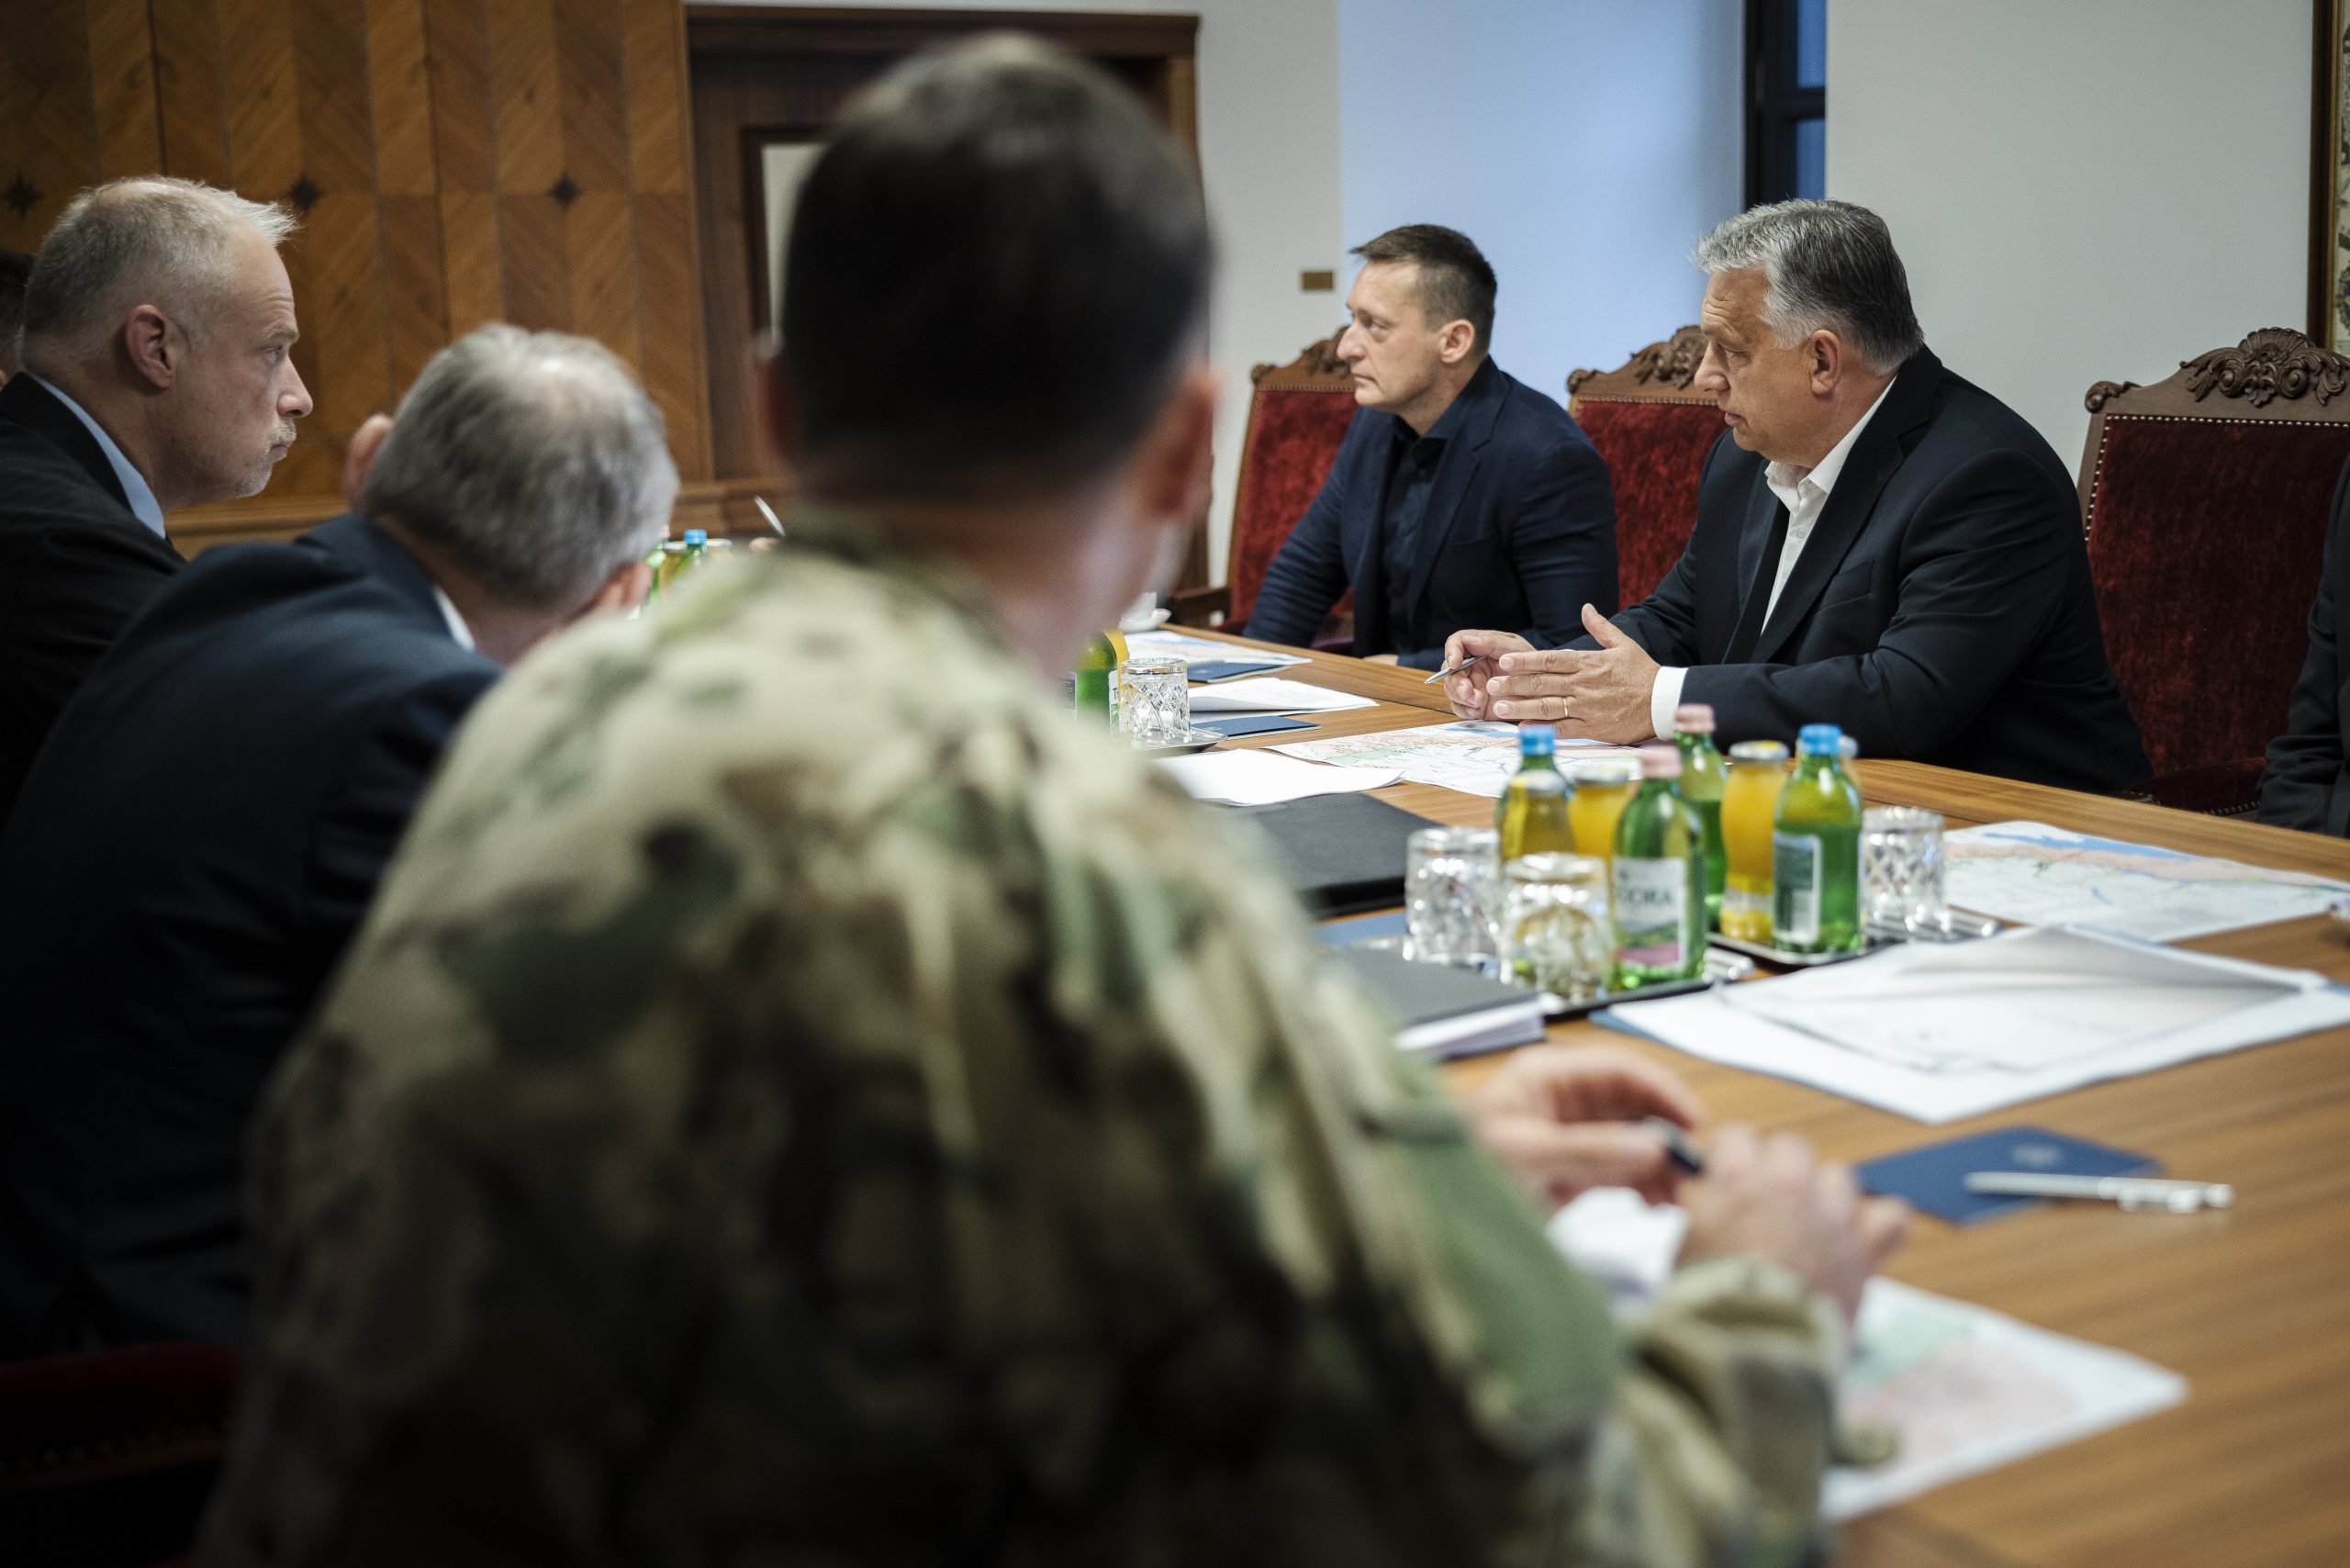 Prime Minister Convenes Defense Council at Dawn after Start of Ukraine Offensive